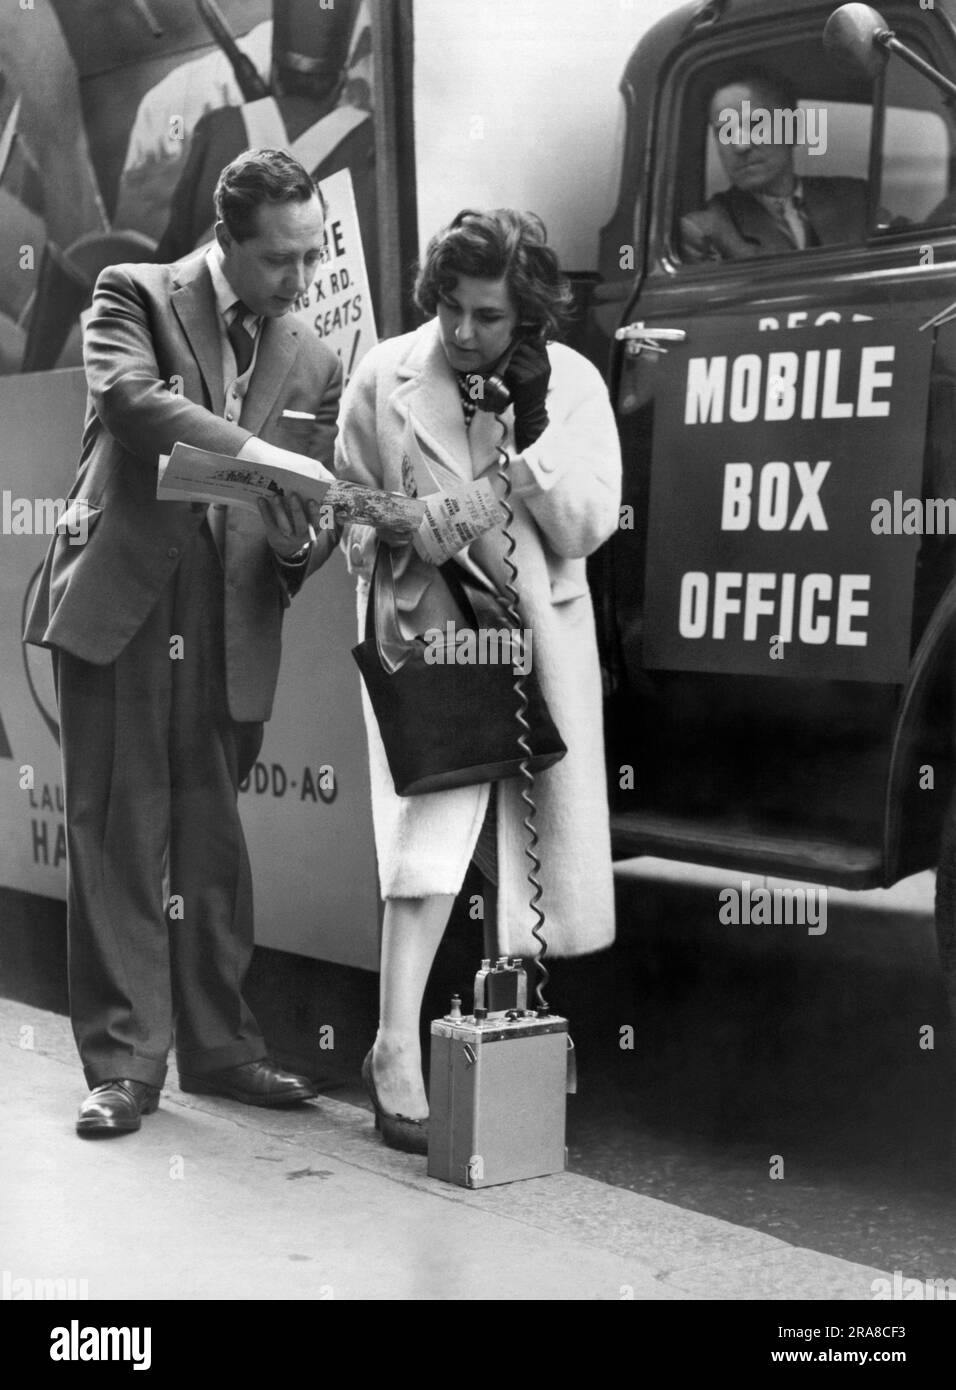 London, England:  October 17, 1960 A movie fan buys a ticket from the first mobile box office in London by ordering seats with a direct radio link to the cinema. The movie is the premier of 'The Alamo' with John Wayne. Stock Photo